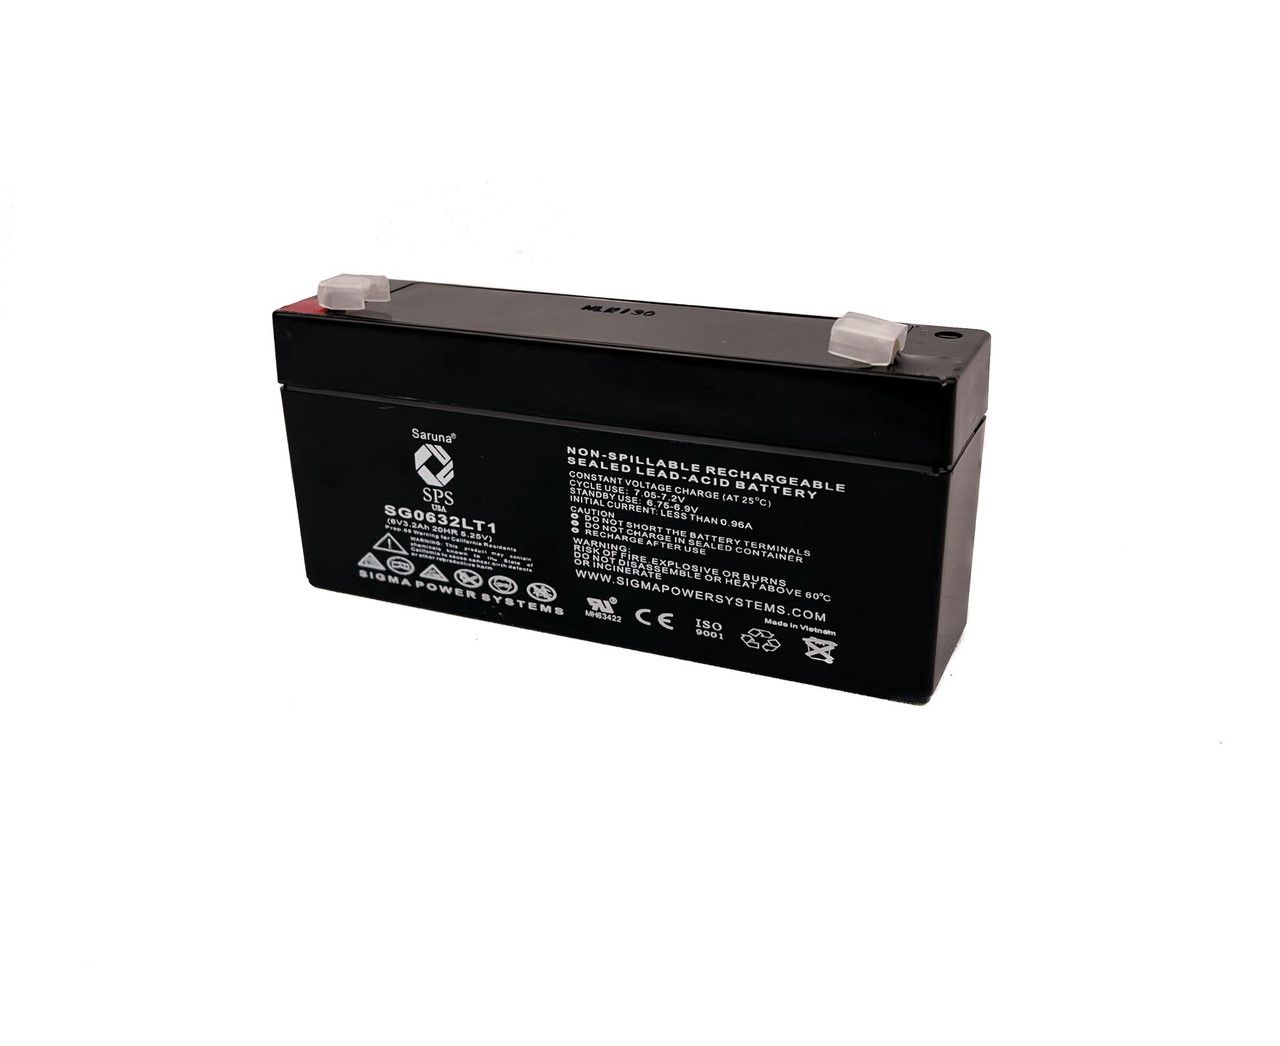 Raion Power 6V 3.2Ah Non-Spillable Replacement Rechargebale Battery for Rigel 304 E.C.G. Monitor